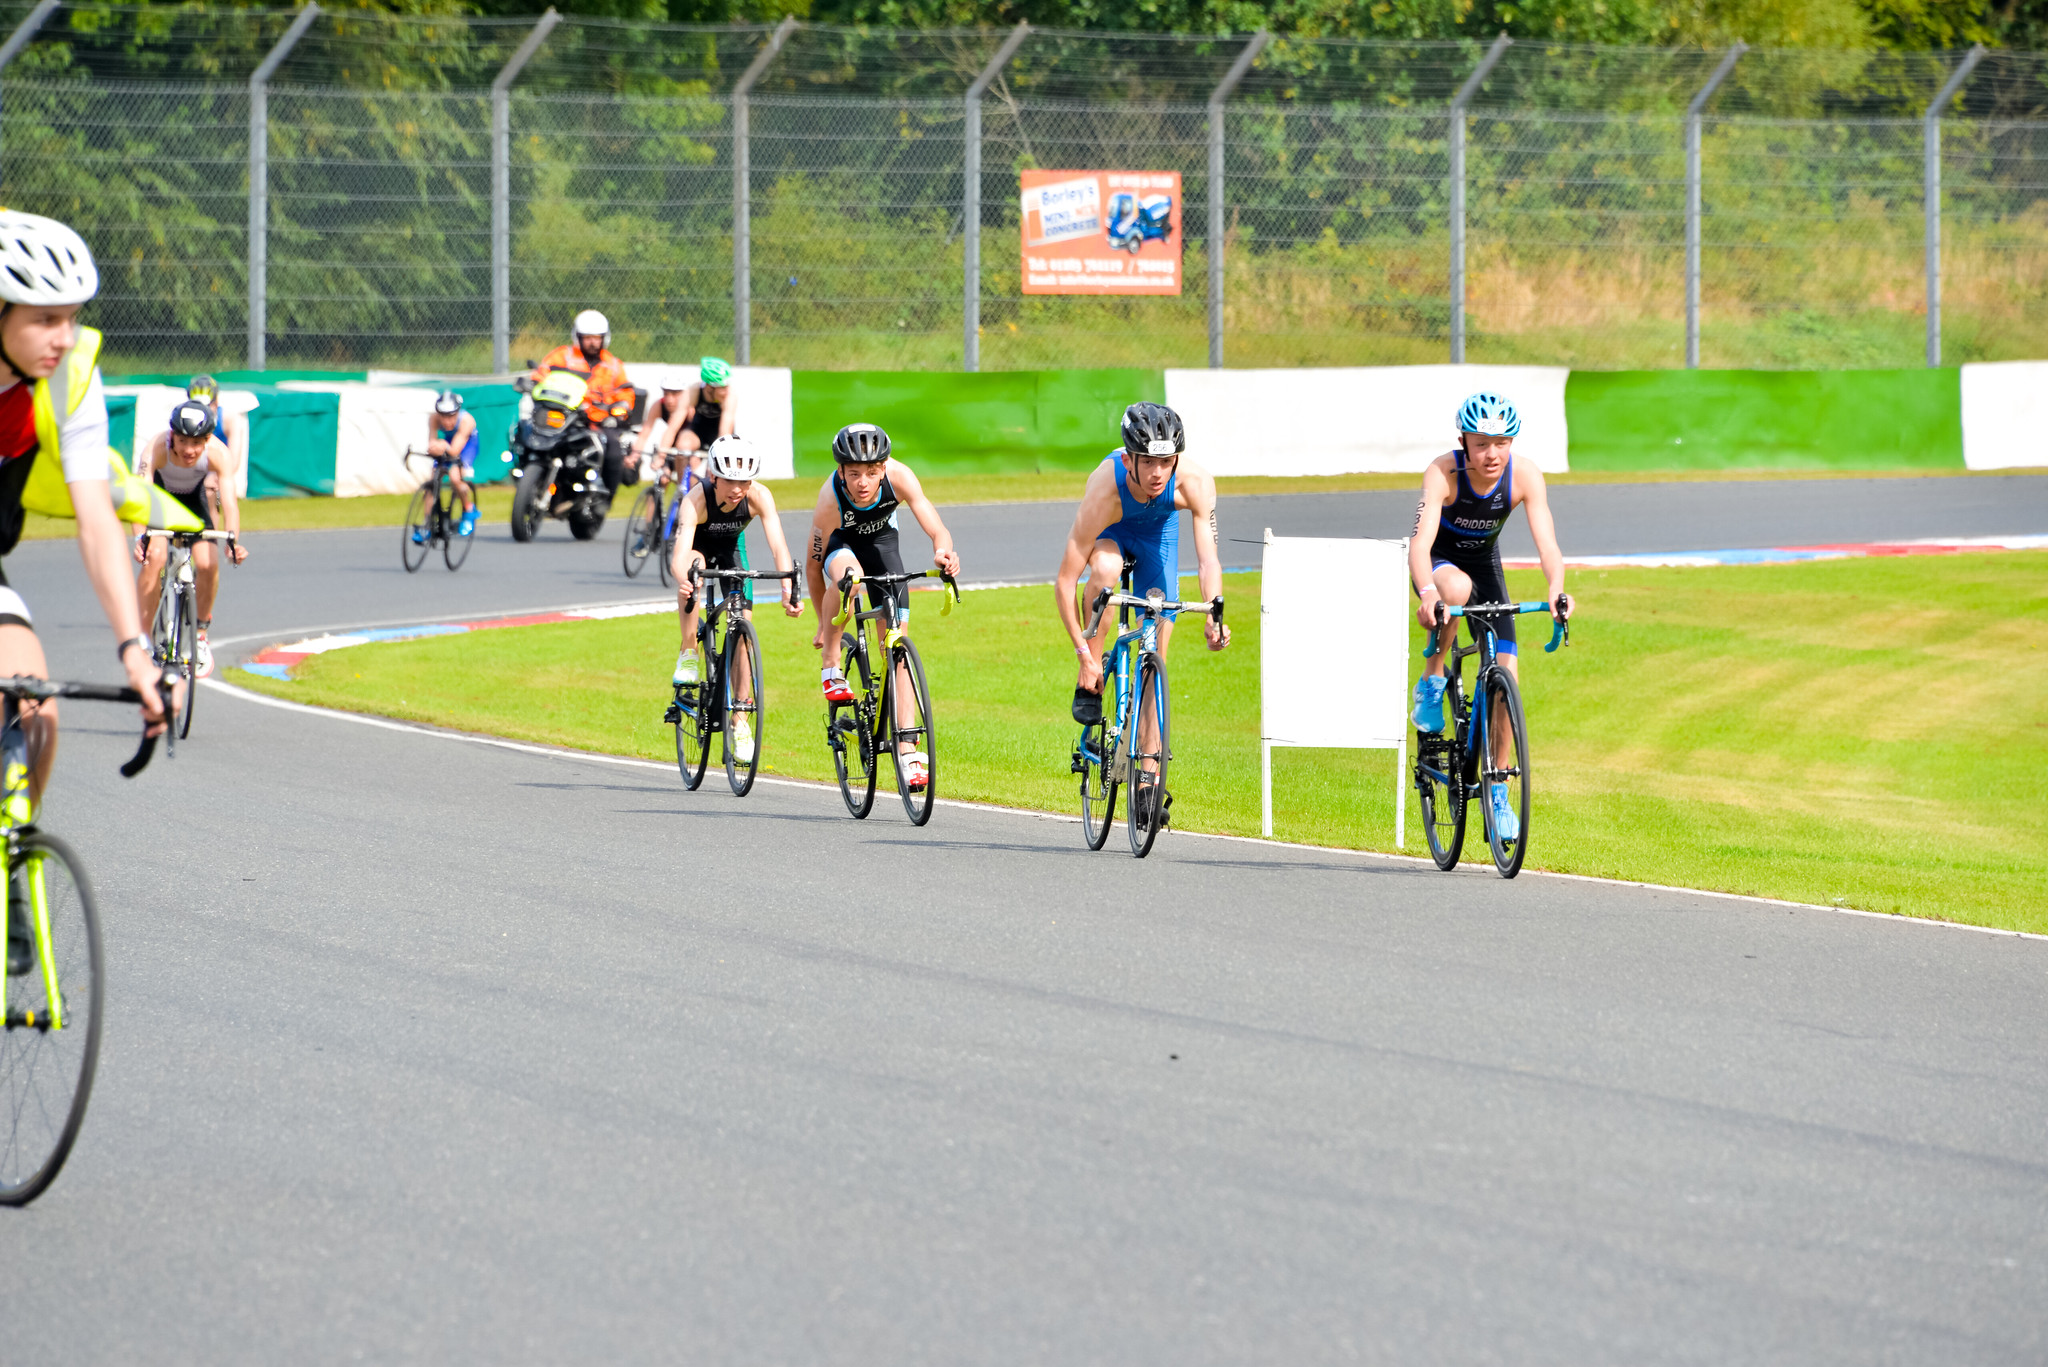 Youth, Junior and Senior athletes set for busy day of racing at Mallory Park